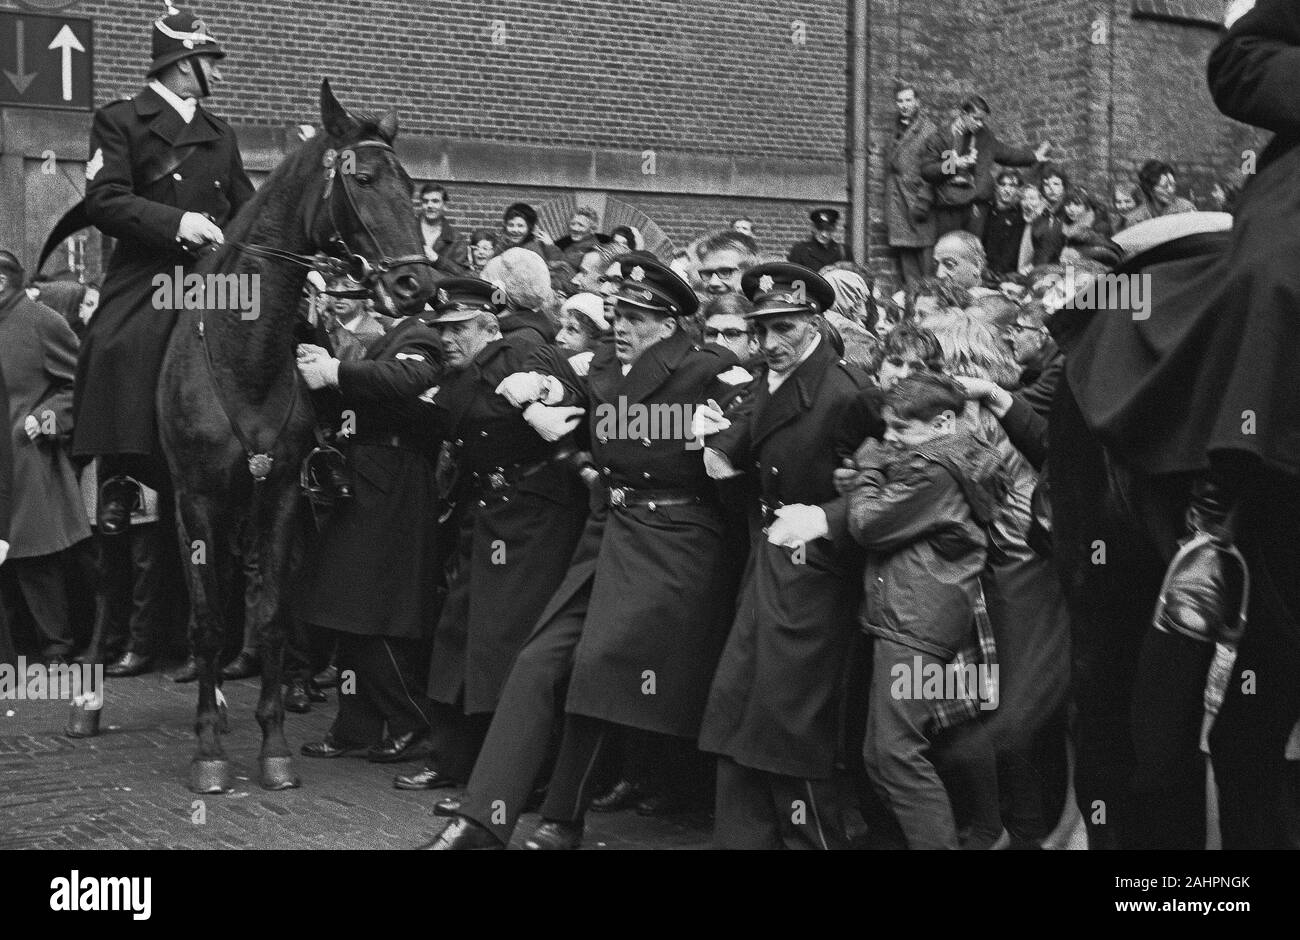 Busy traffic on the Binnenhof, police stop people Date 11 February 1964 Location Binnenhof, The Hague, South Holland Stock Photo